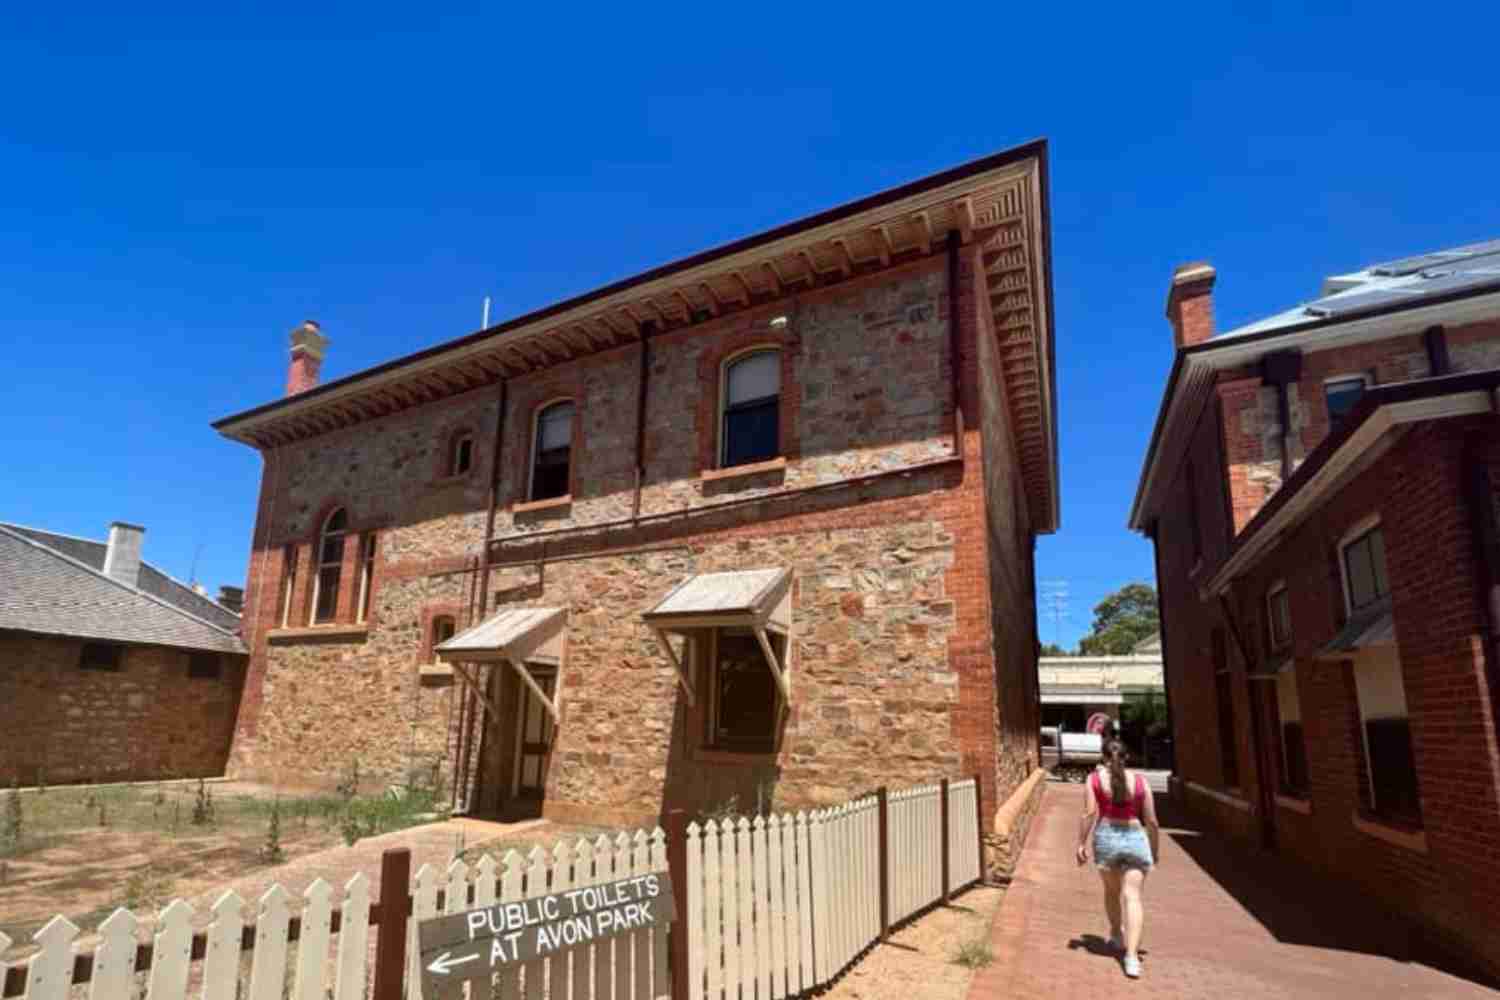 The old gaol and courthouse in York Western Australia